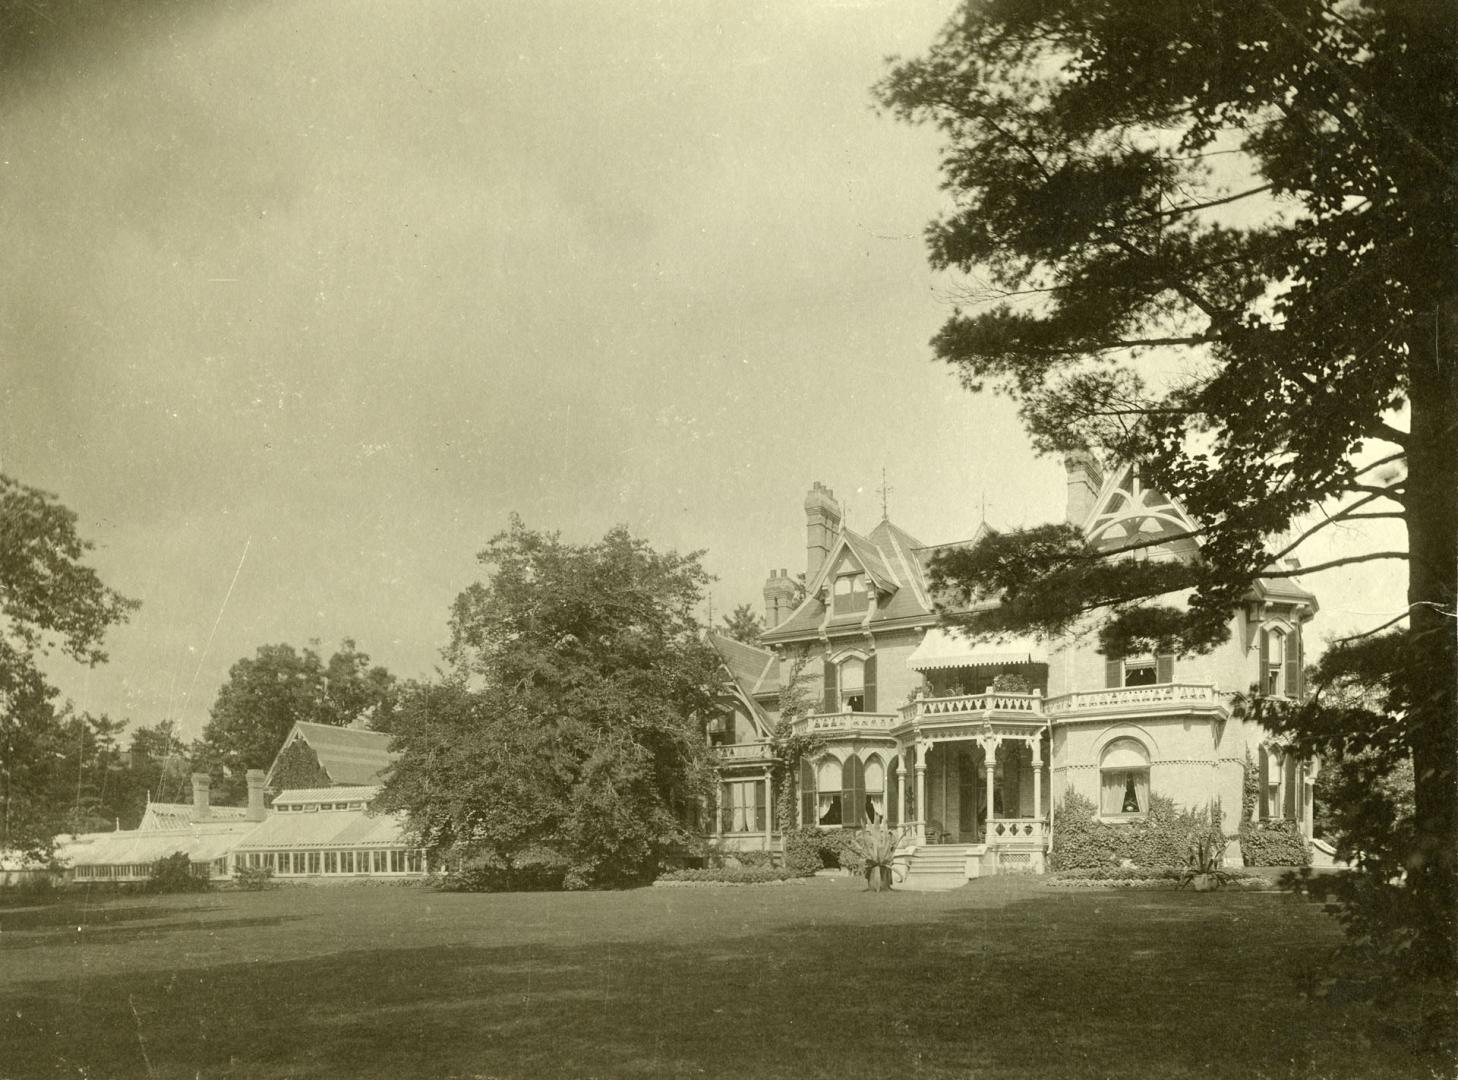 Image shows a limited view of a house with some trees around it.